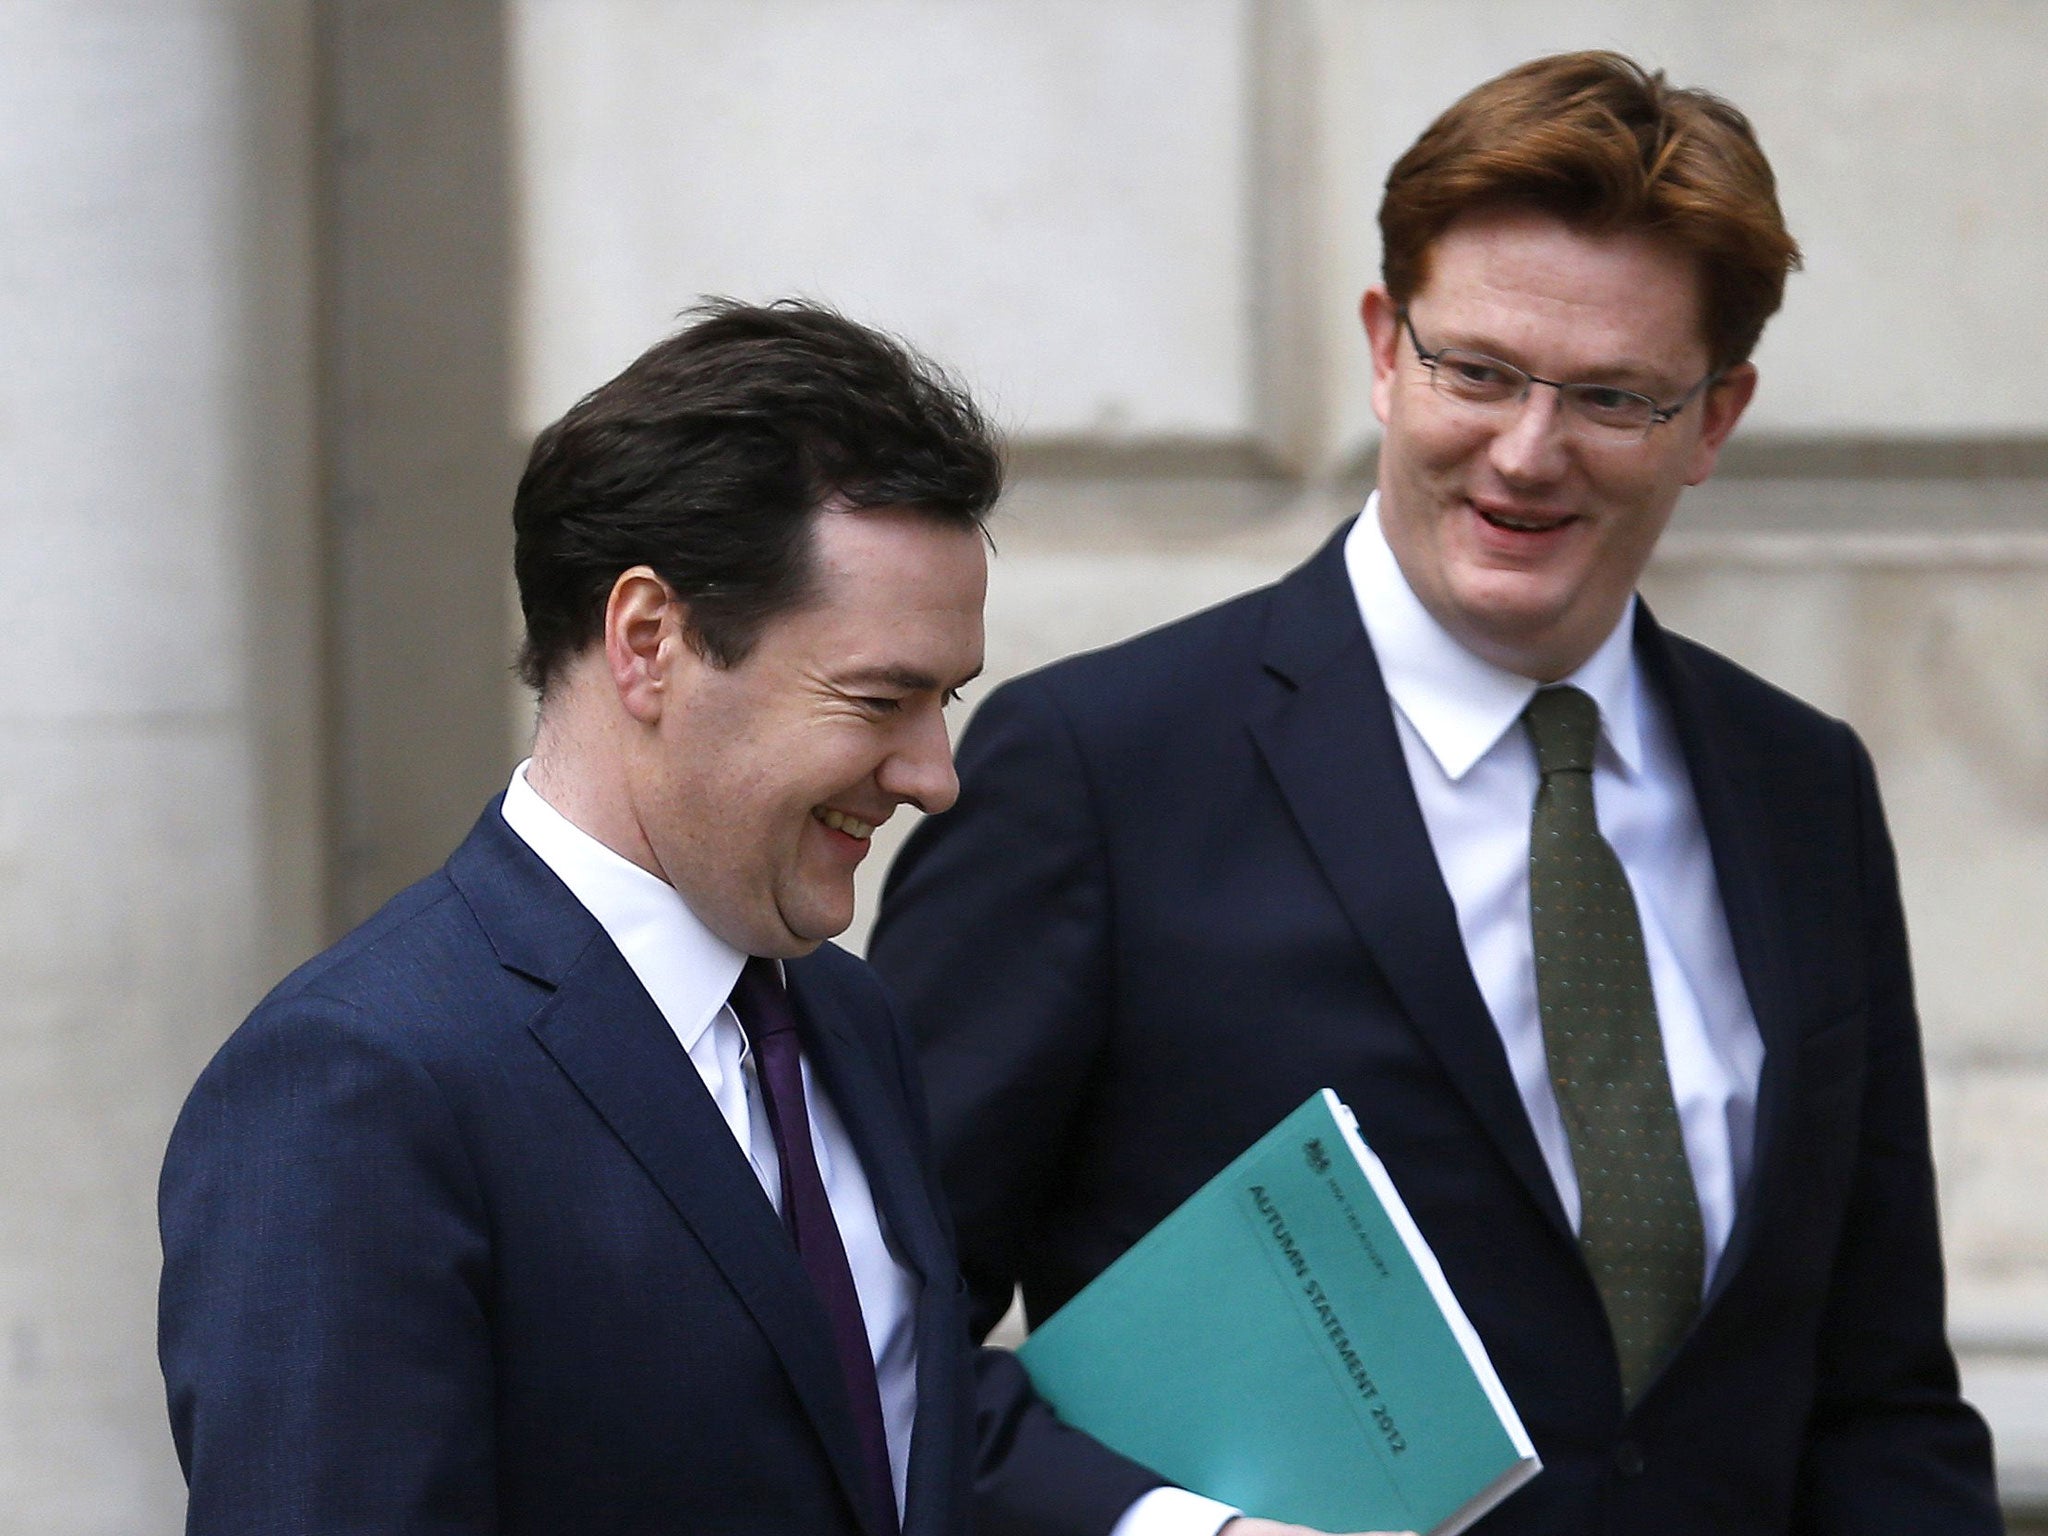 Danny Alexander (right) has caused controversy among Liberal Democrat activists by supporting George Osborne's spending cuts